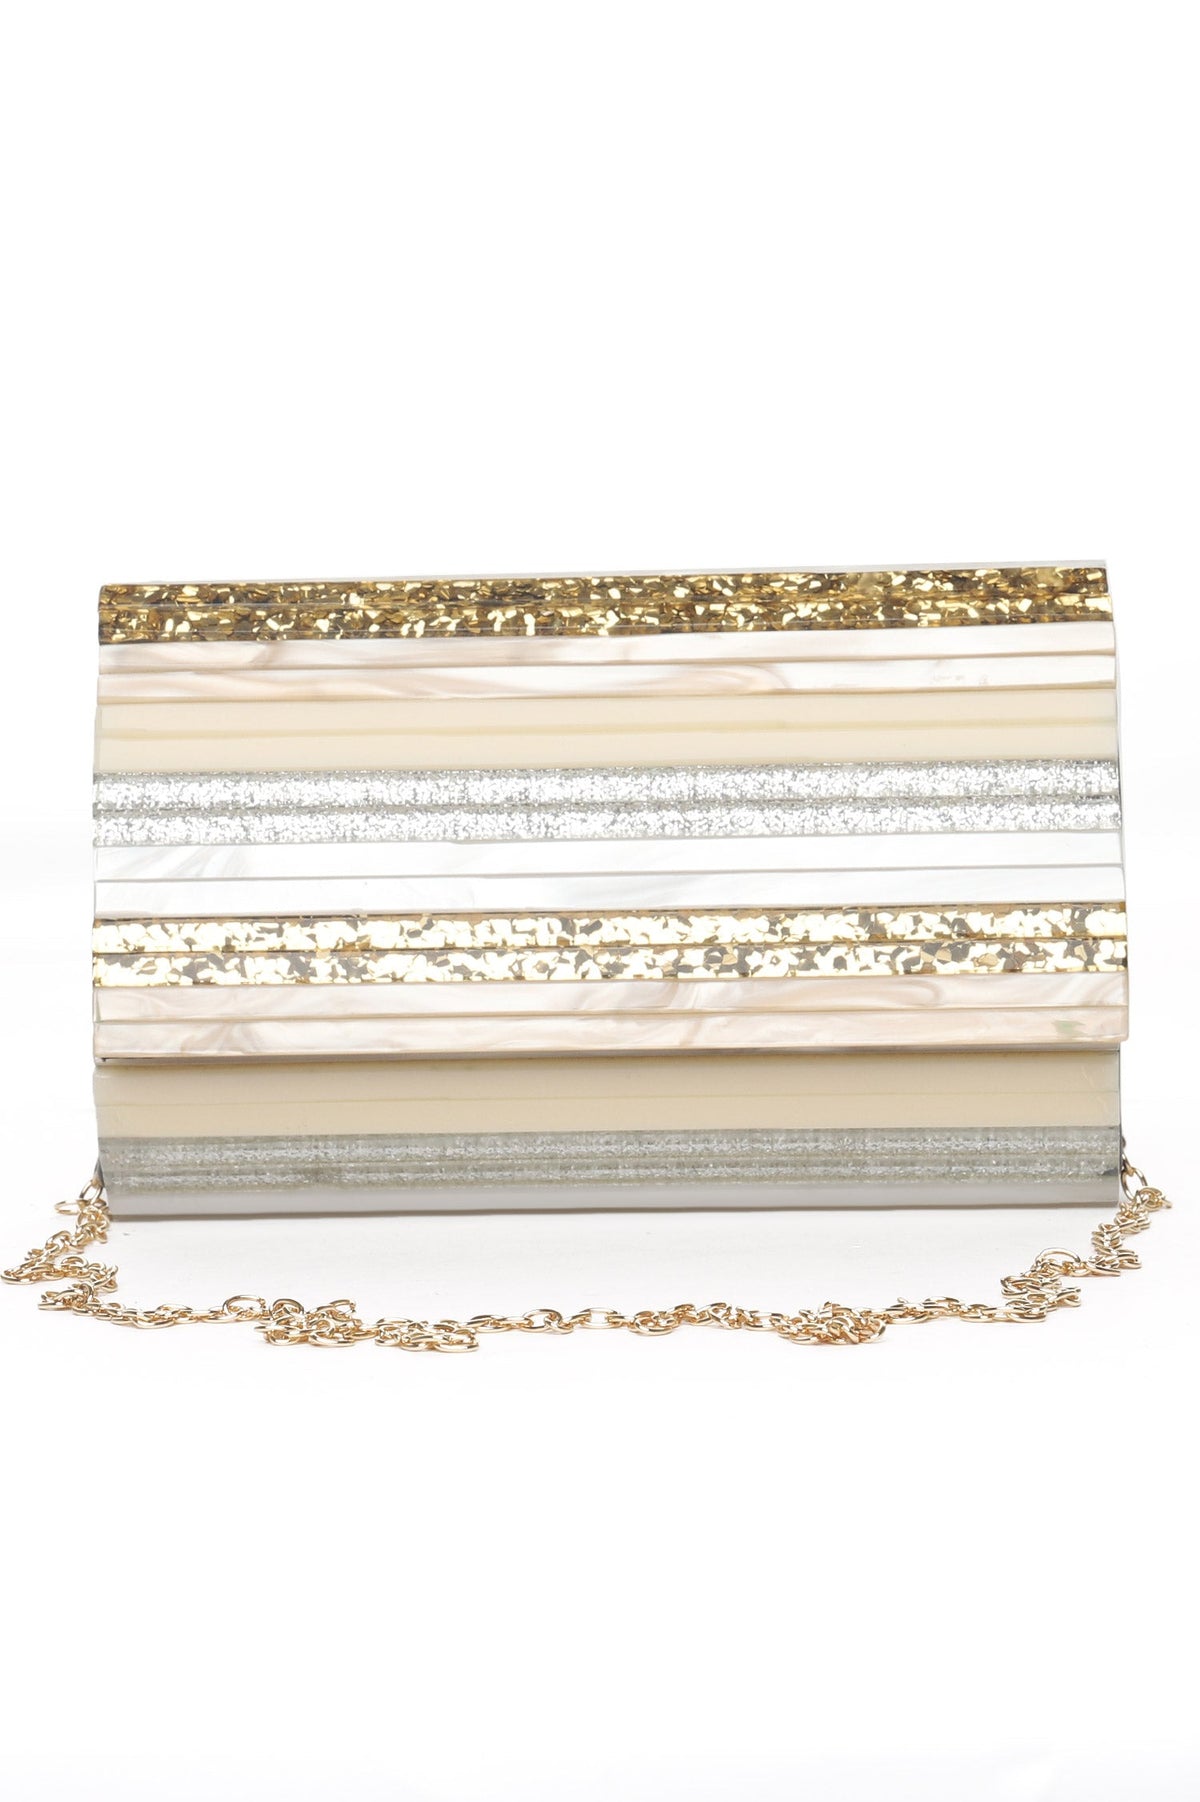 MARBLE STRIPED CLUTCH-GOLD